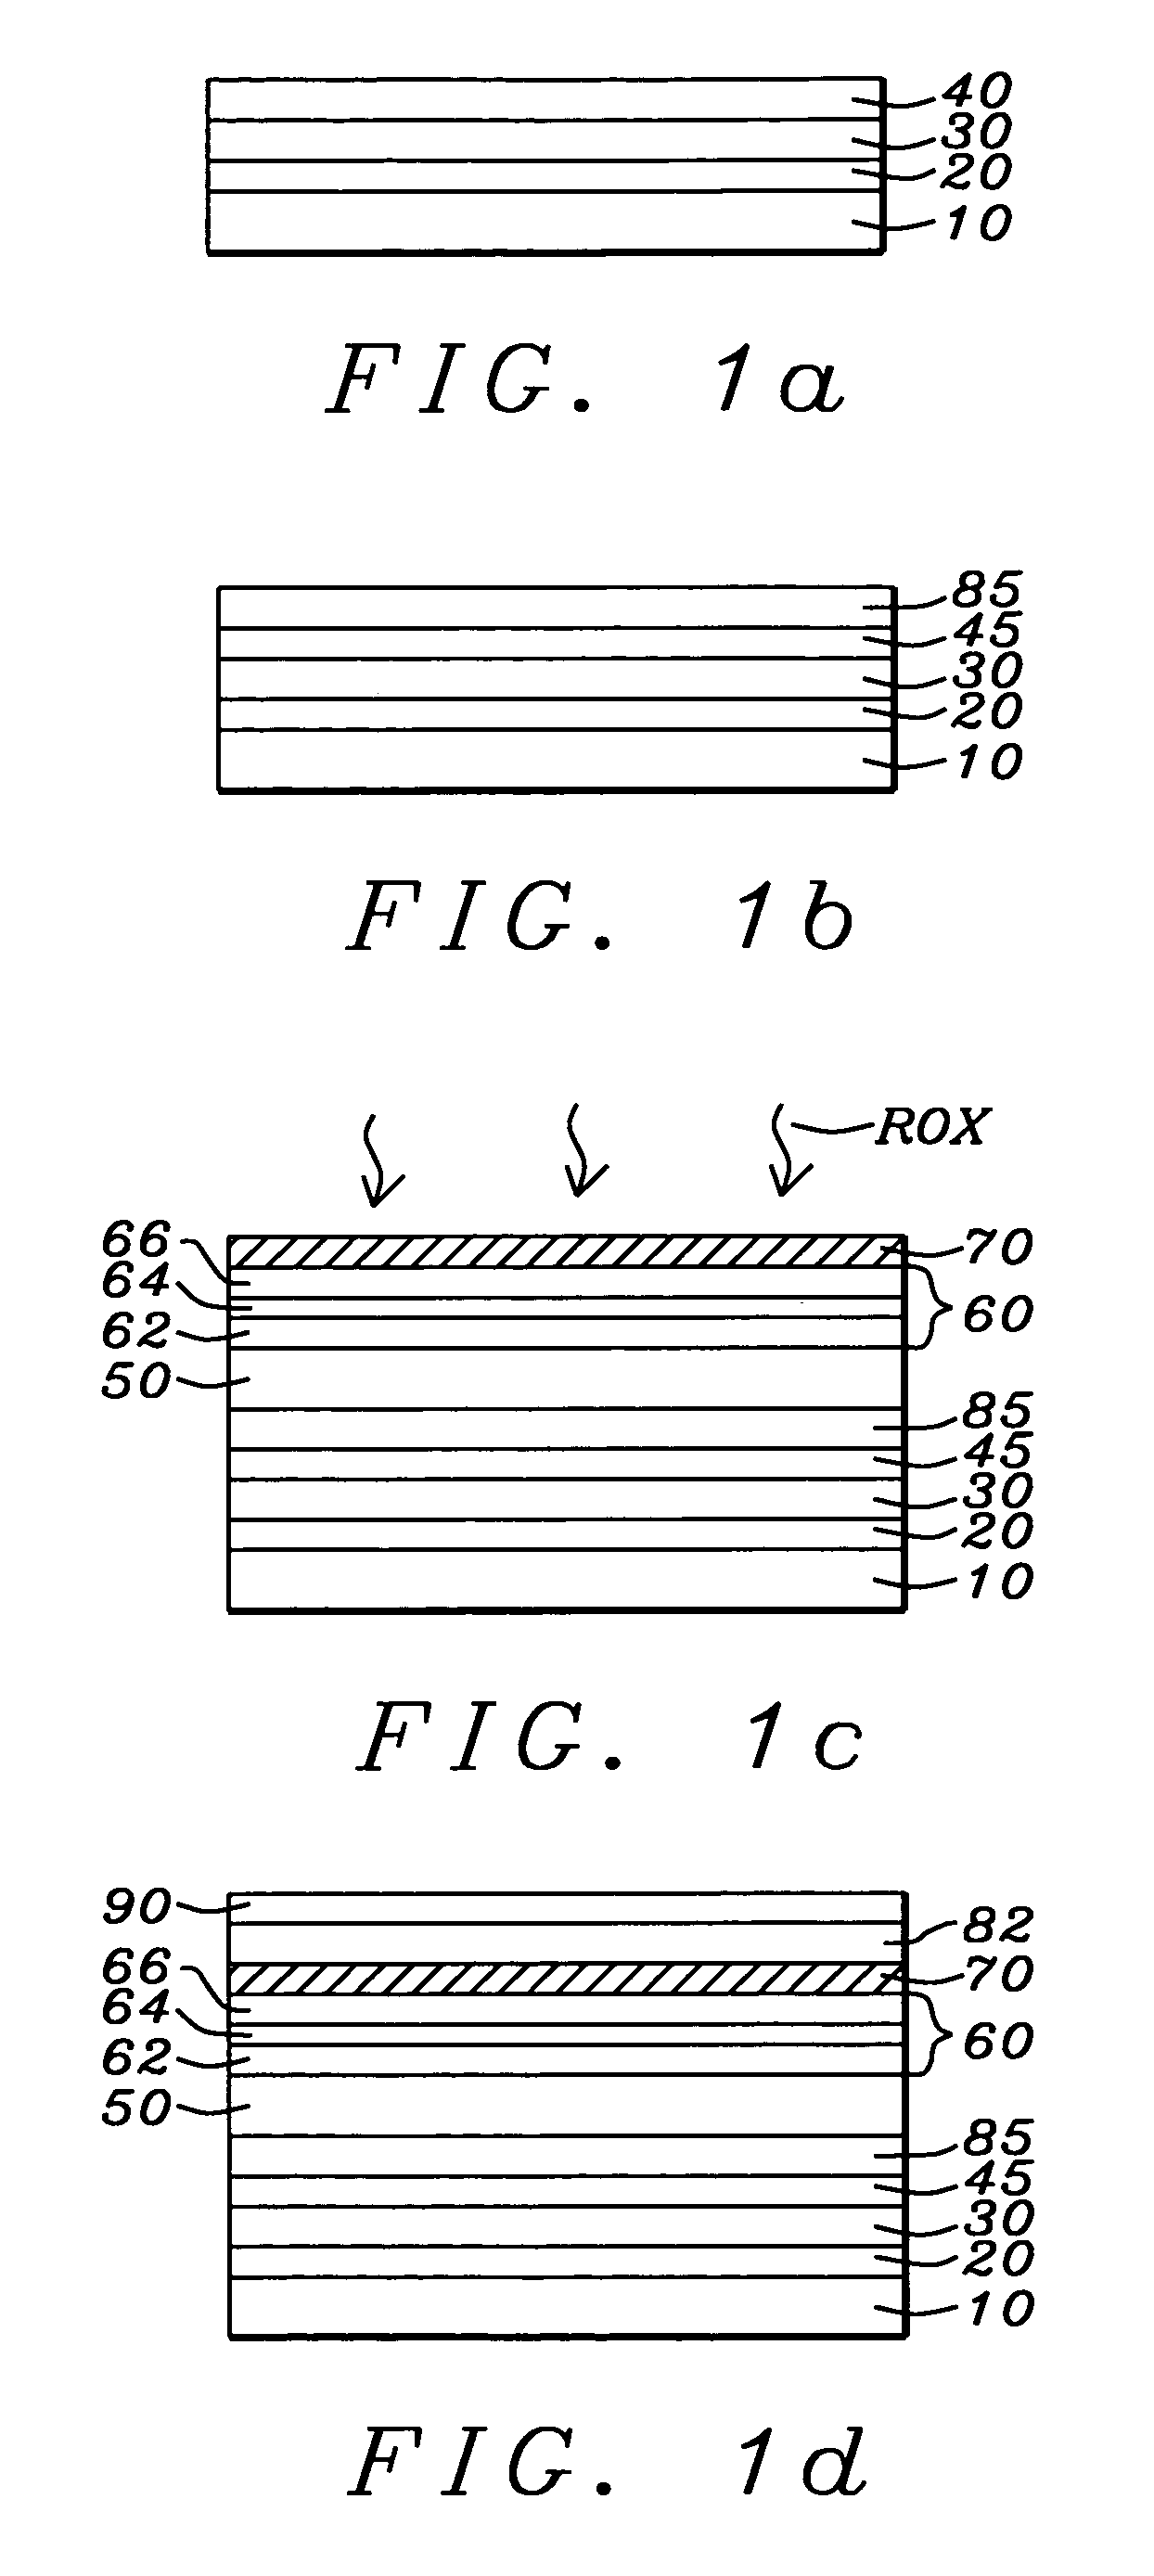 Method of forming a magnetic tunneling junction (MTJ) MRAM device and a tunneling magnetoresistive (TMR) read head